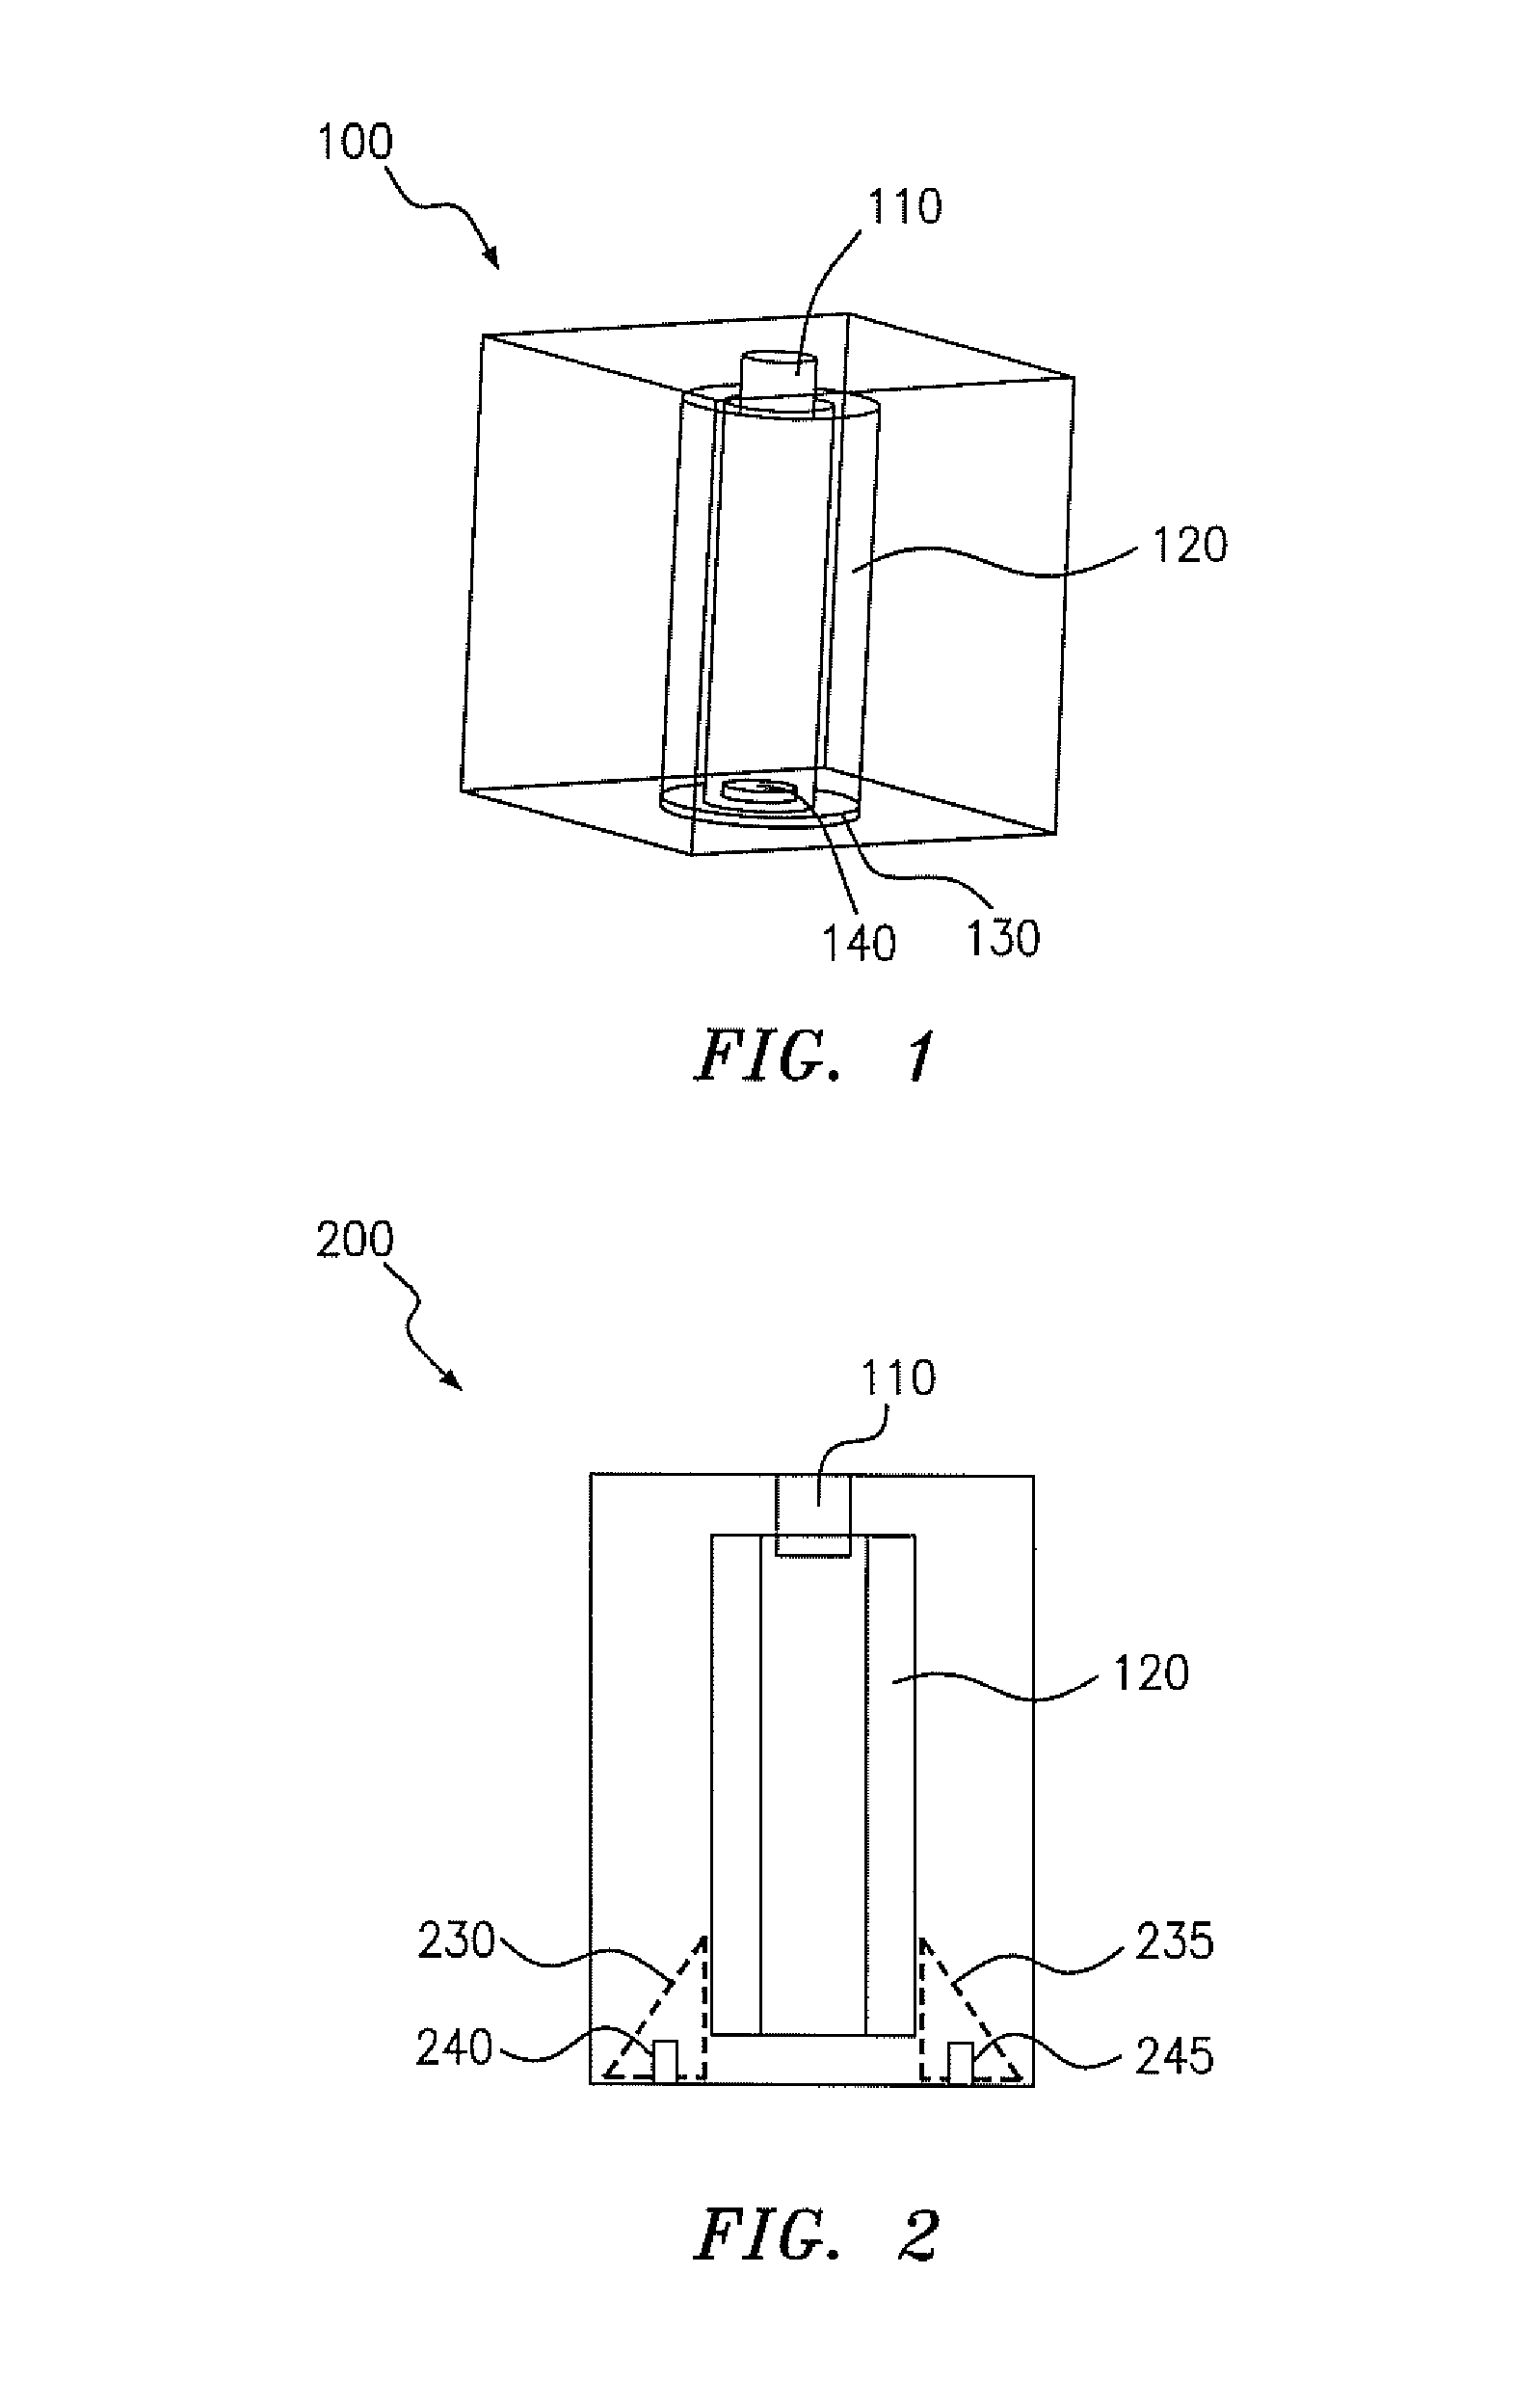 Dielectric combine cavity filter having ceramic resonator rods suspended by polymer wedge mounting structures